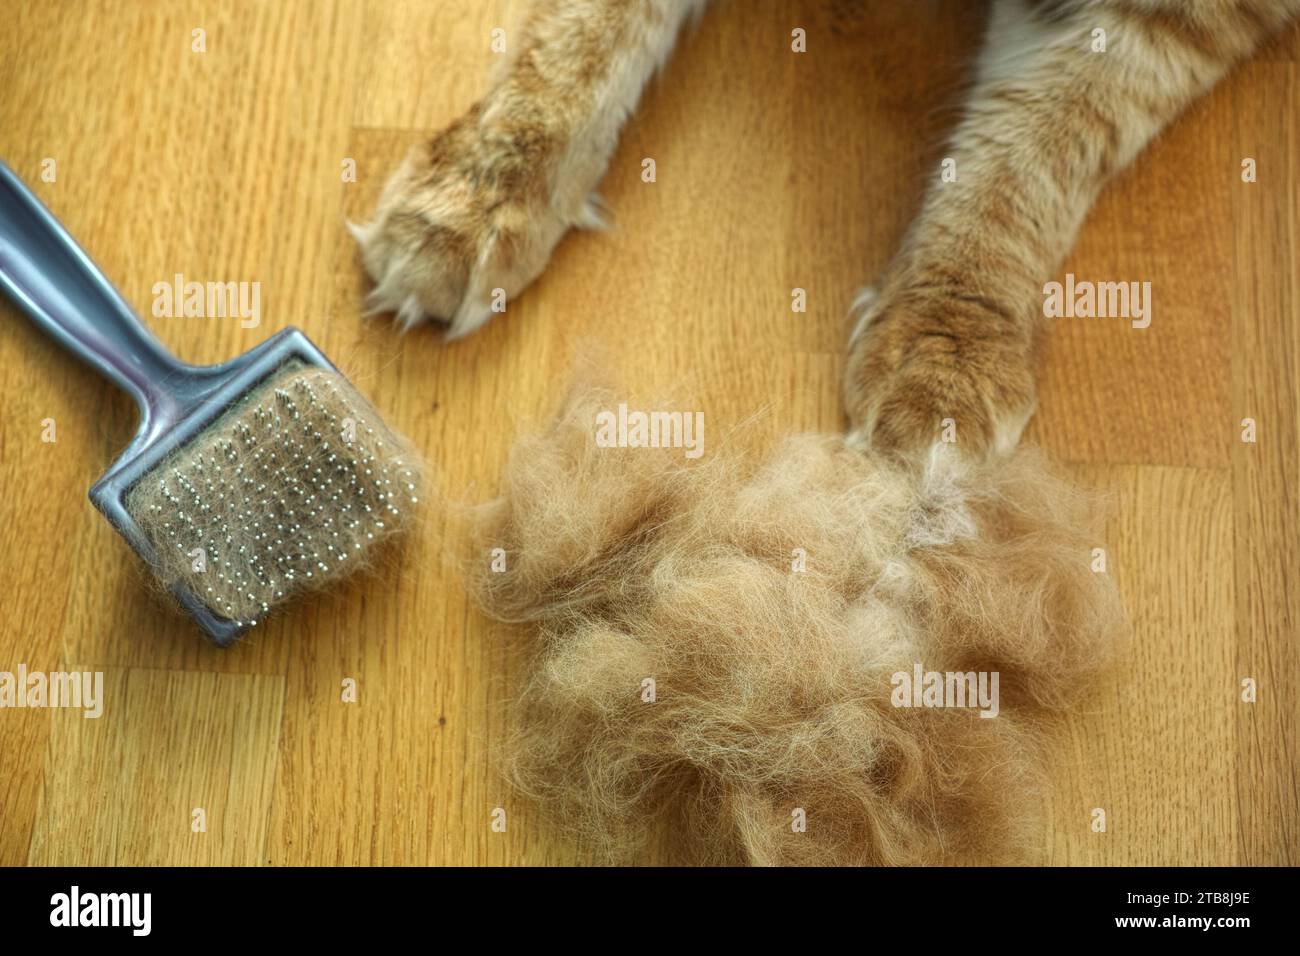 A red Maine Coon cat lying next to a comb and a pile of its fur. Close up. Stock Photo